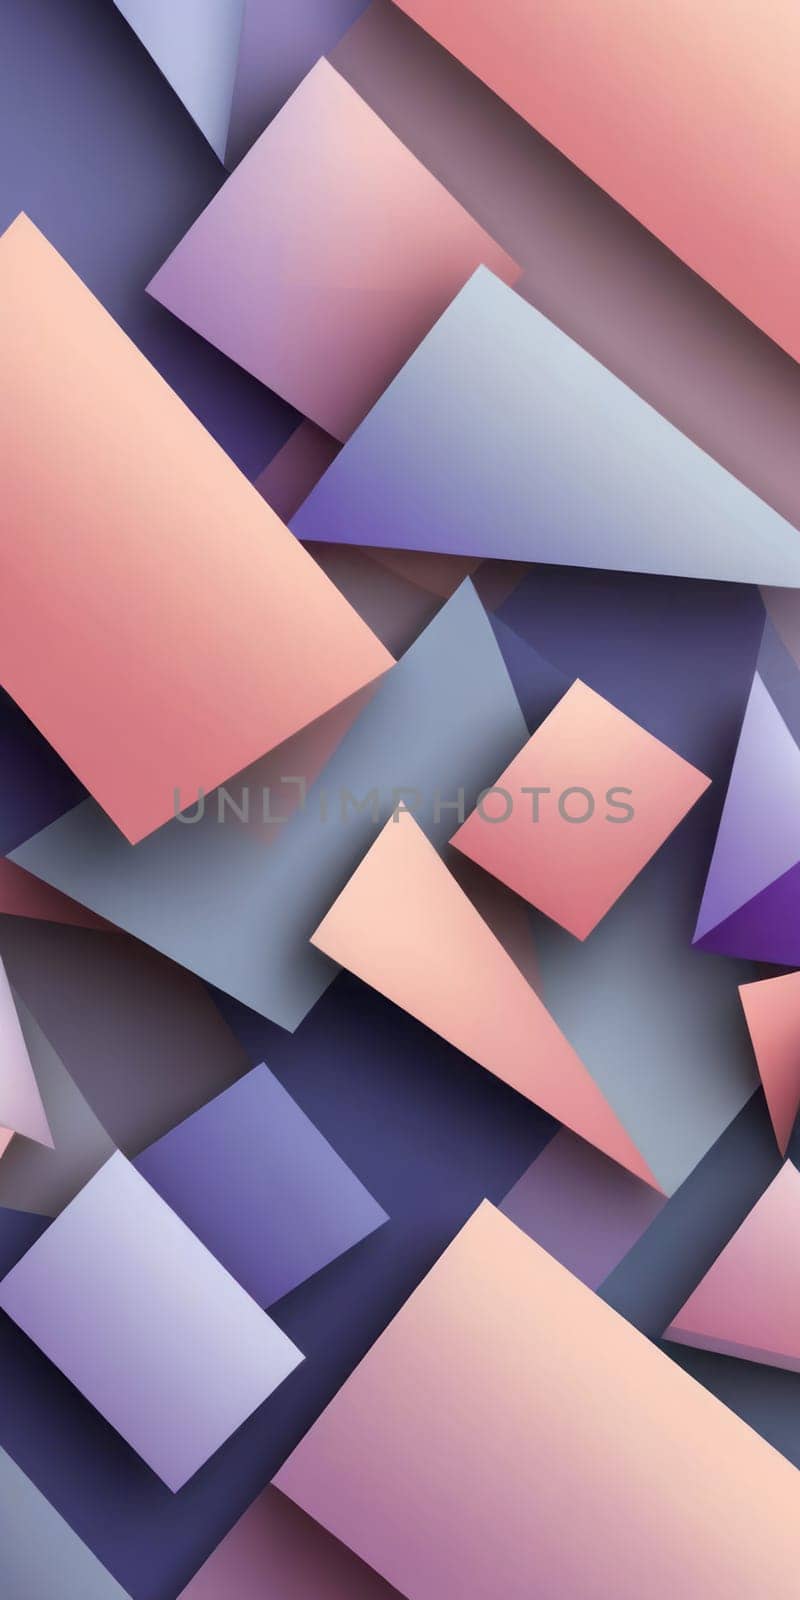 Cubist Shapes in Gray and Blush by nkotlyar